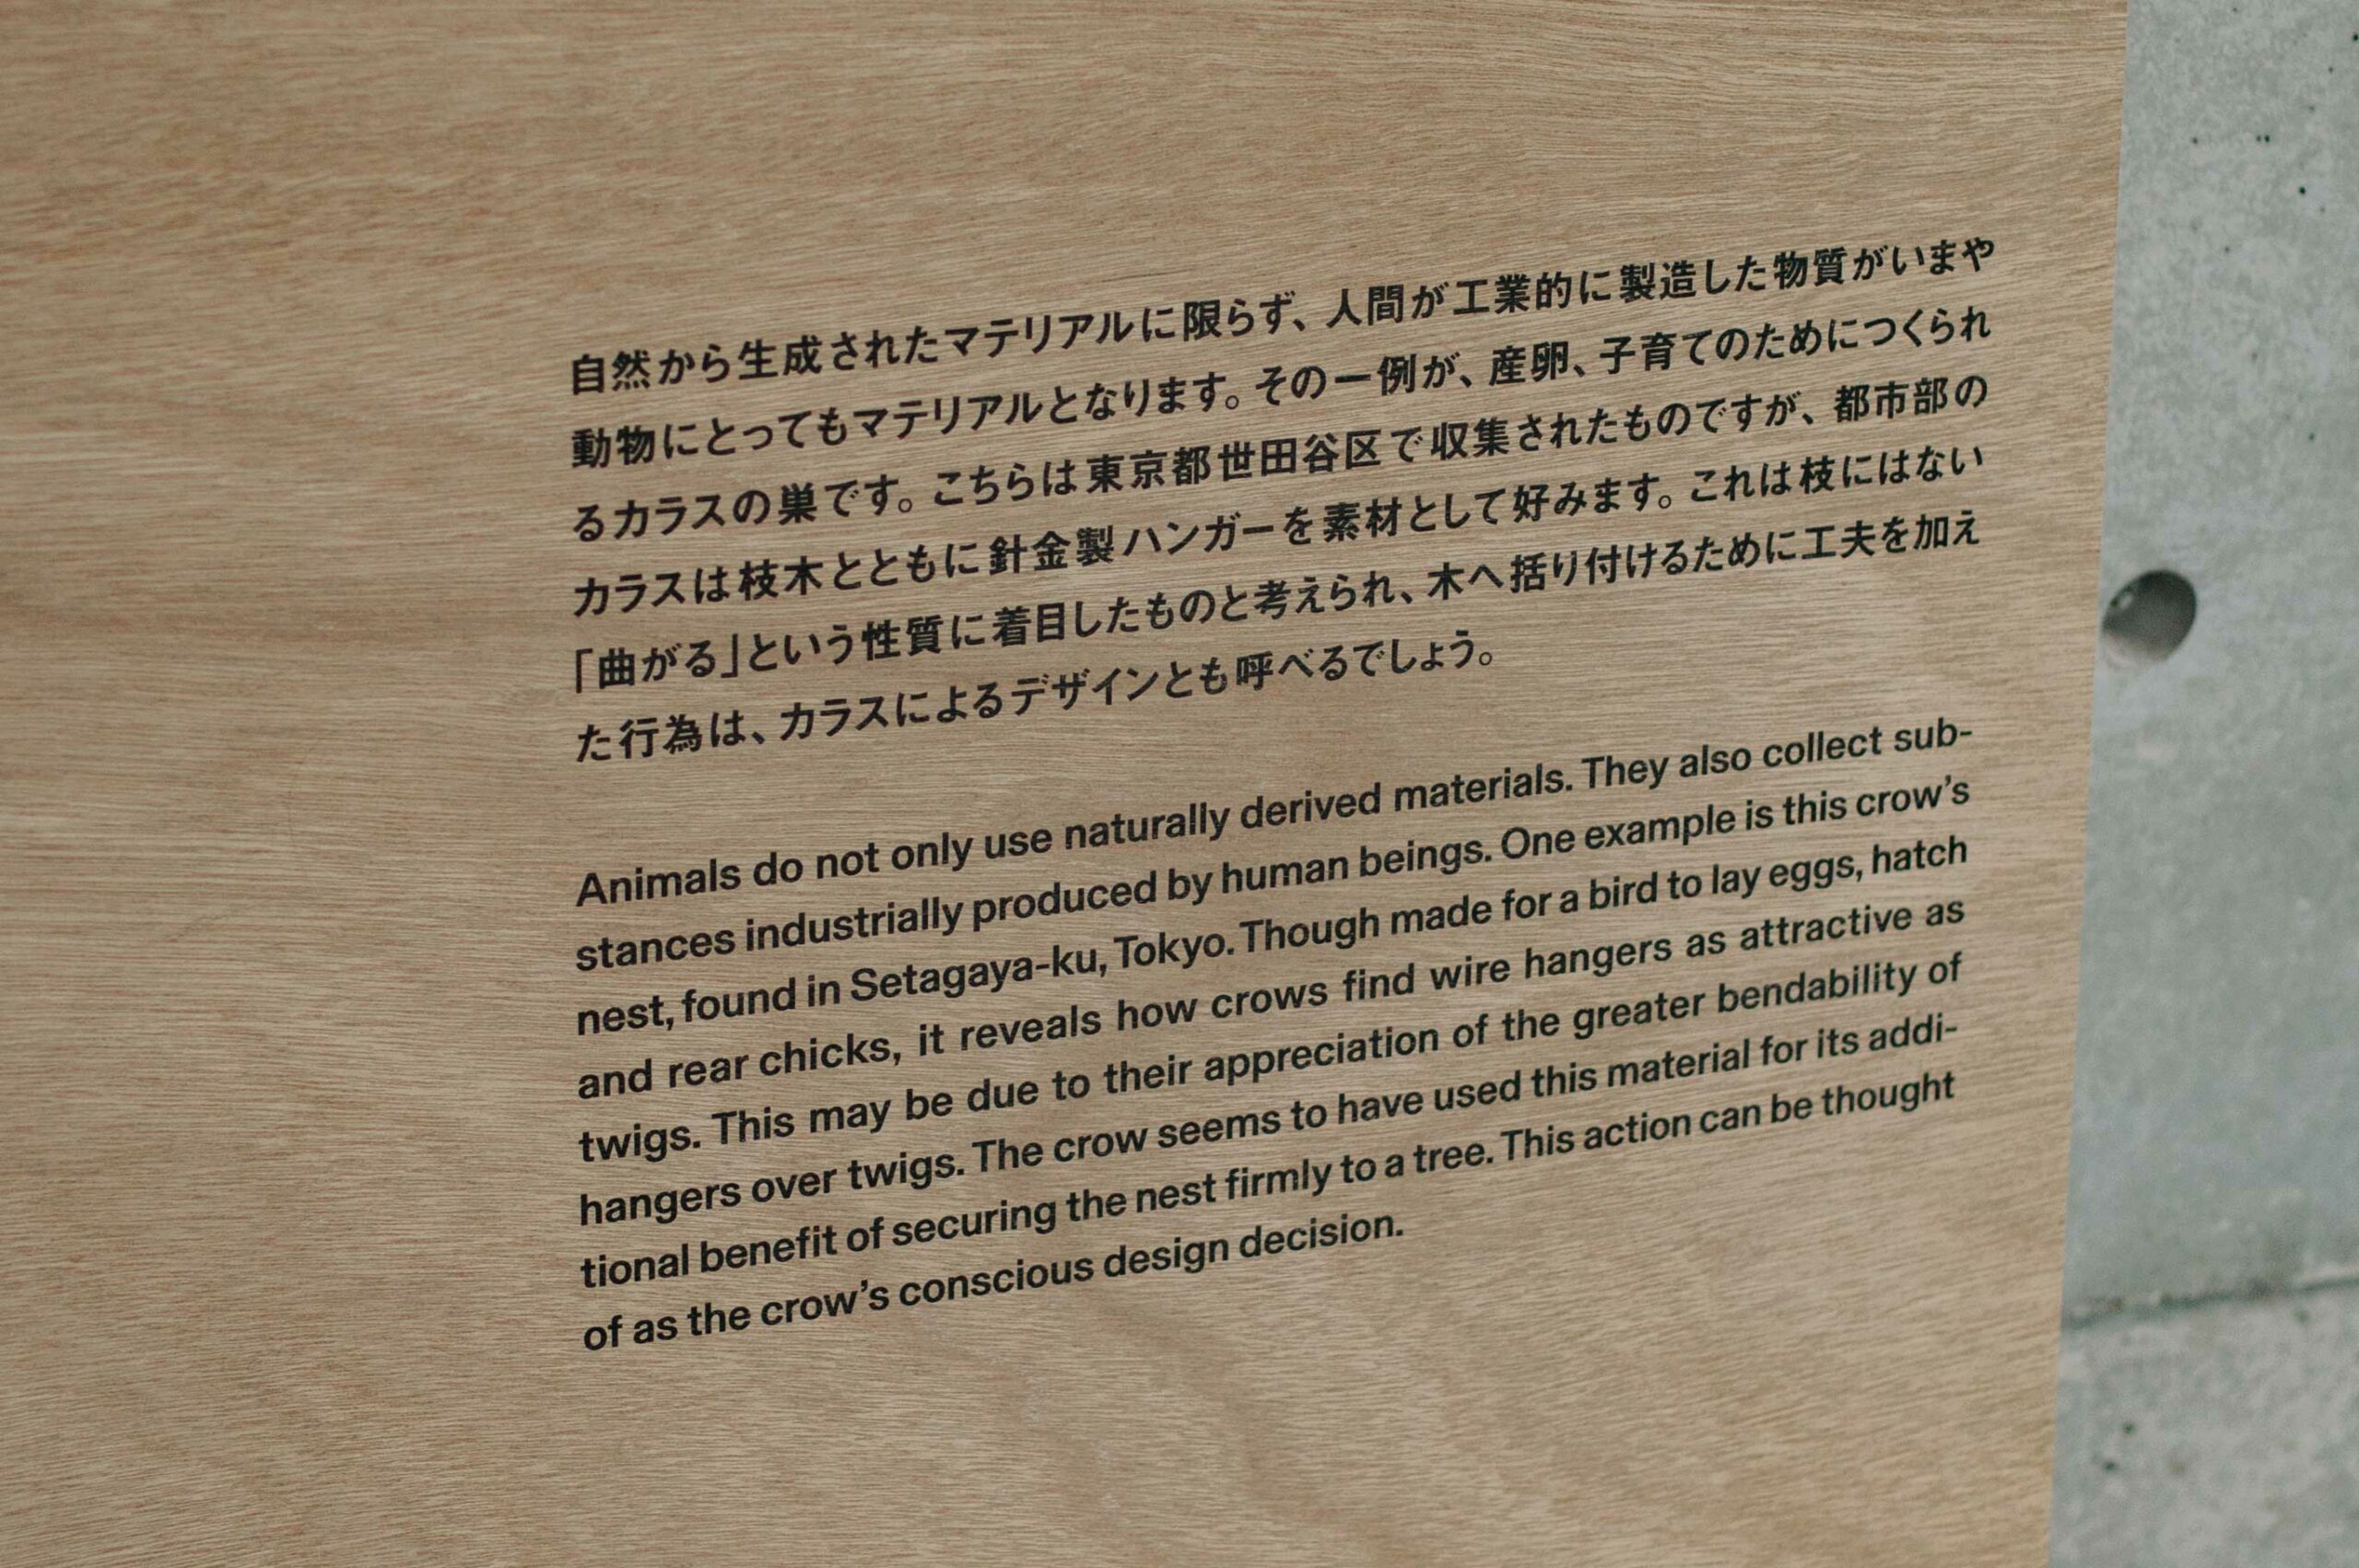 A paragraph welcoming visitors to 21_21 Design Sight explains the ecological consideration's of the gallery's current exhibition.